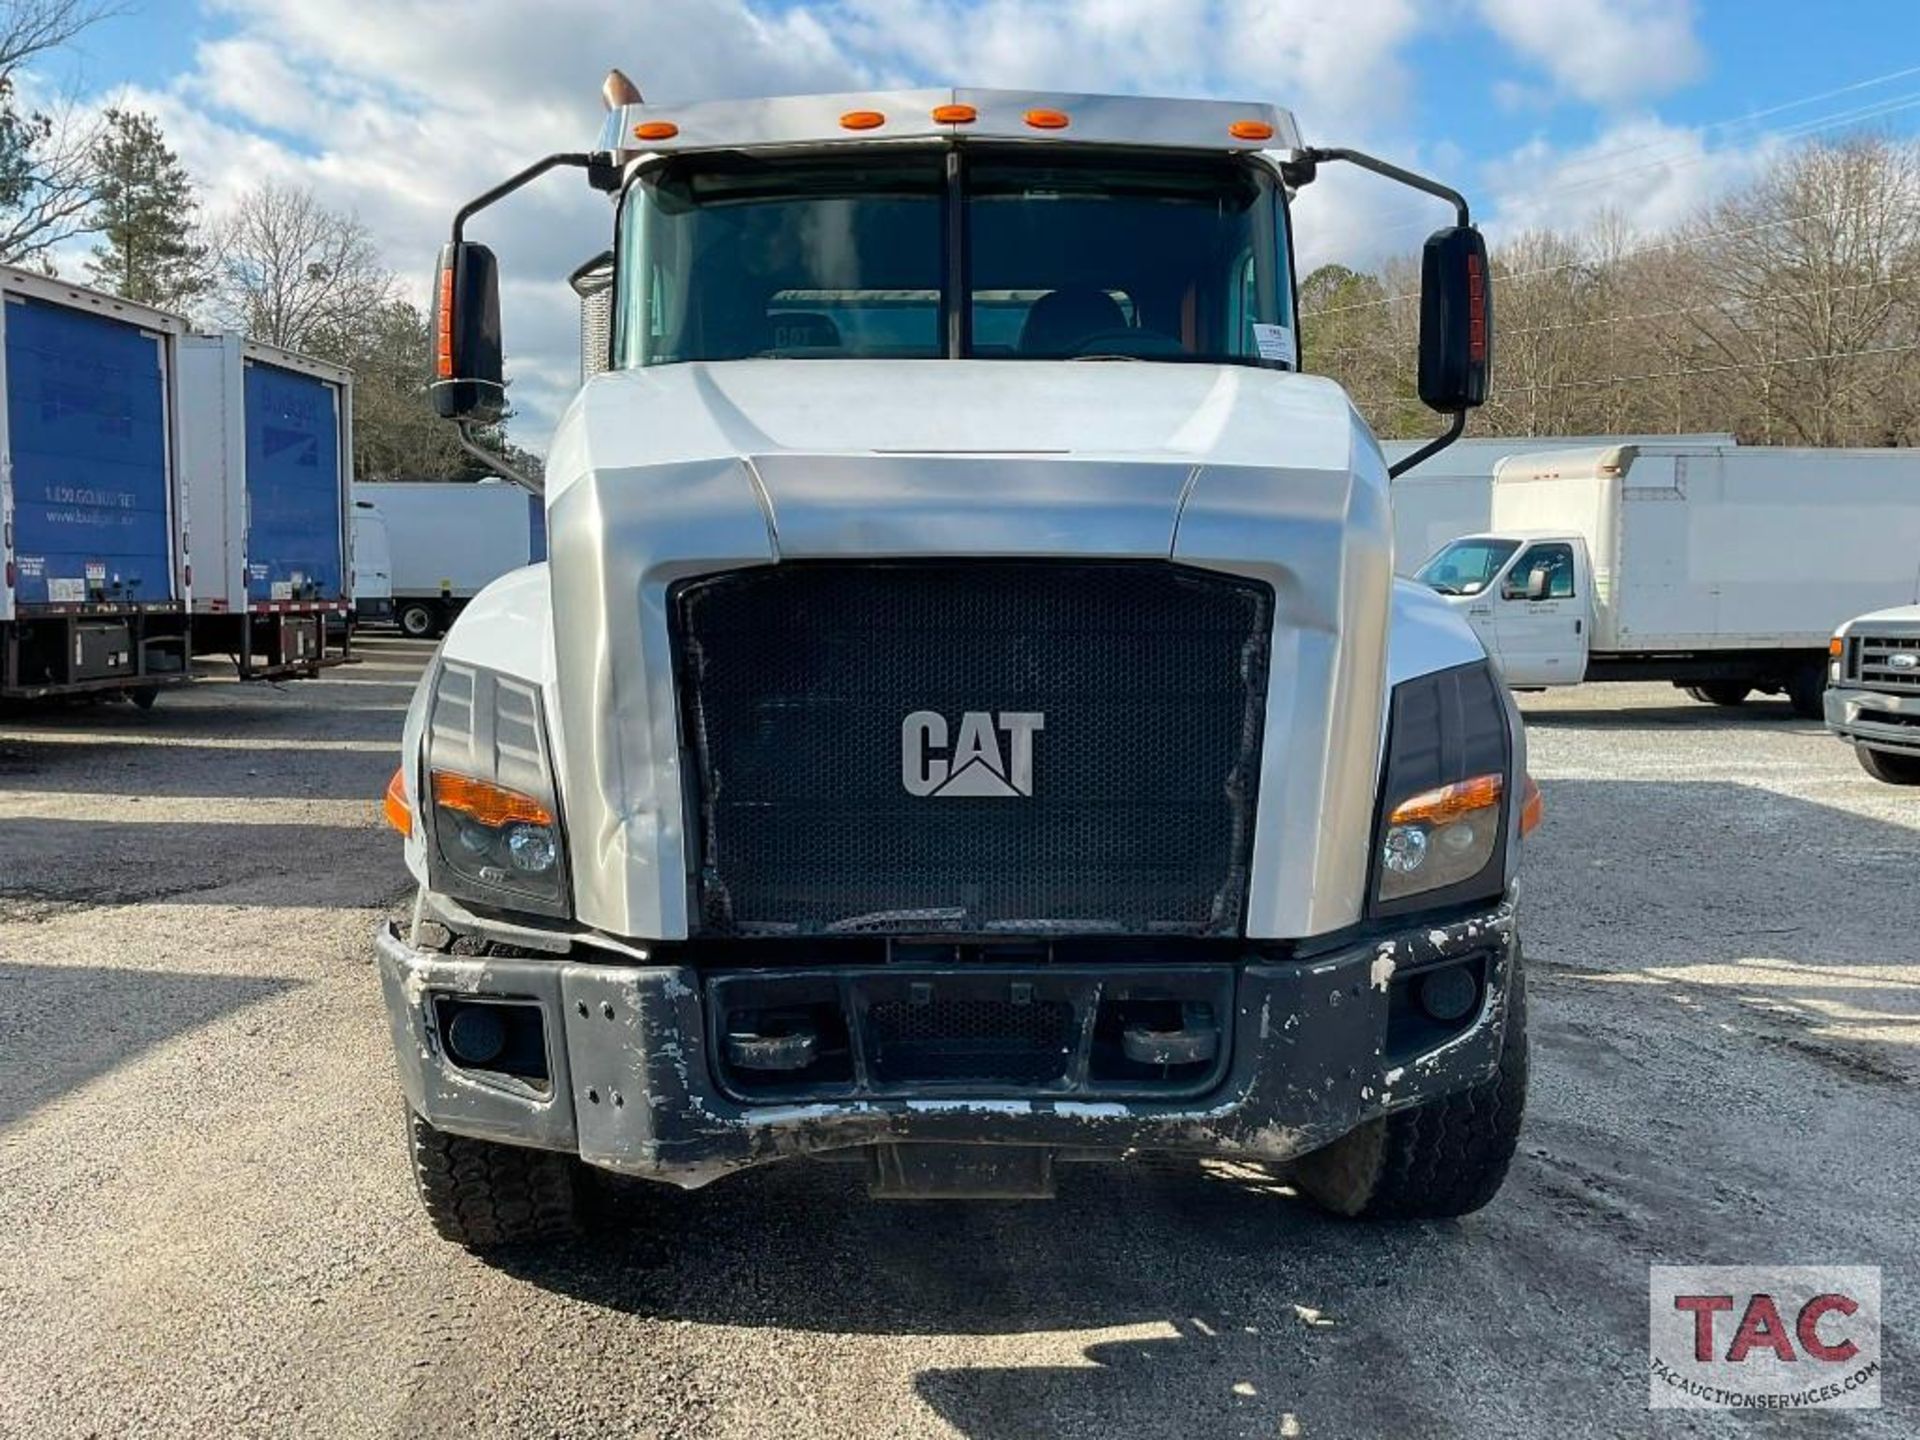 2012 CAT CT660S Roll-Off Truck W/ 20yd Dumpster - Image 15 of 148